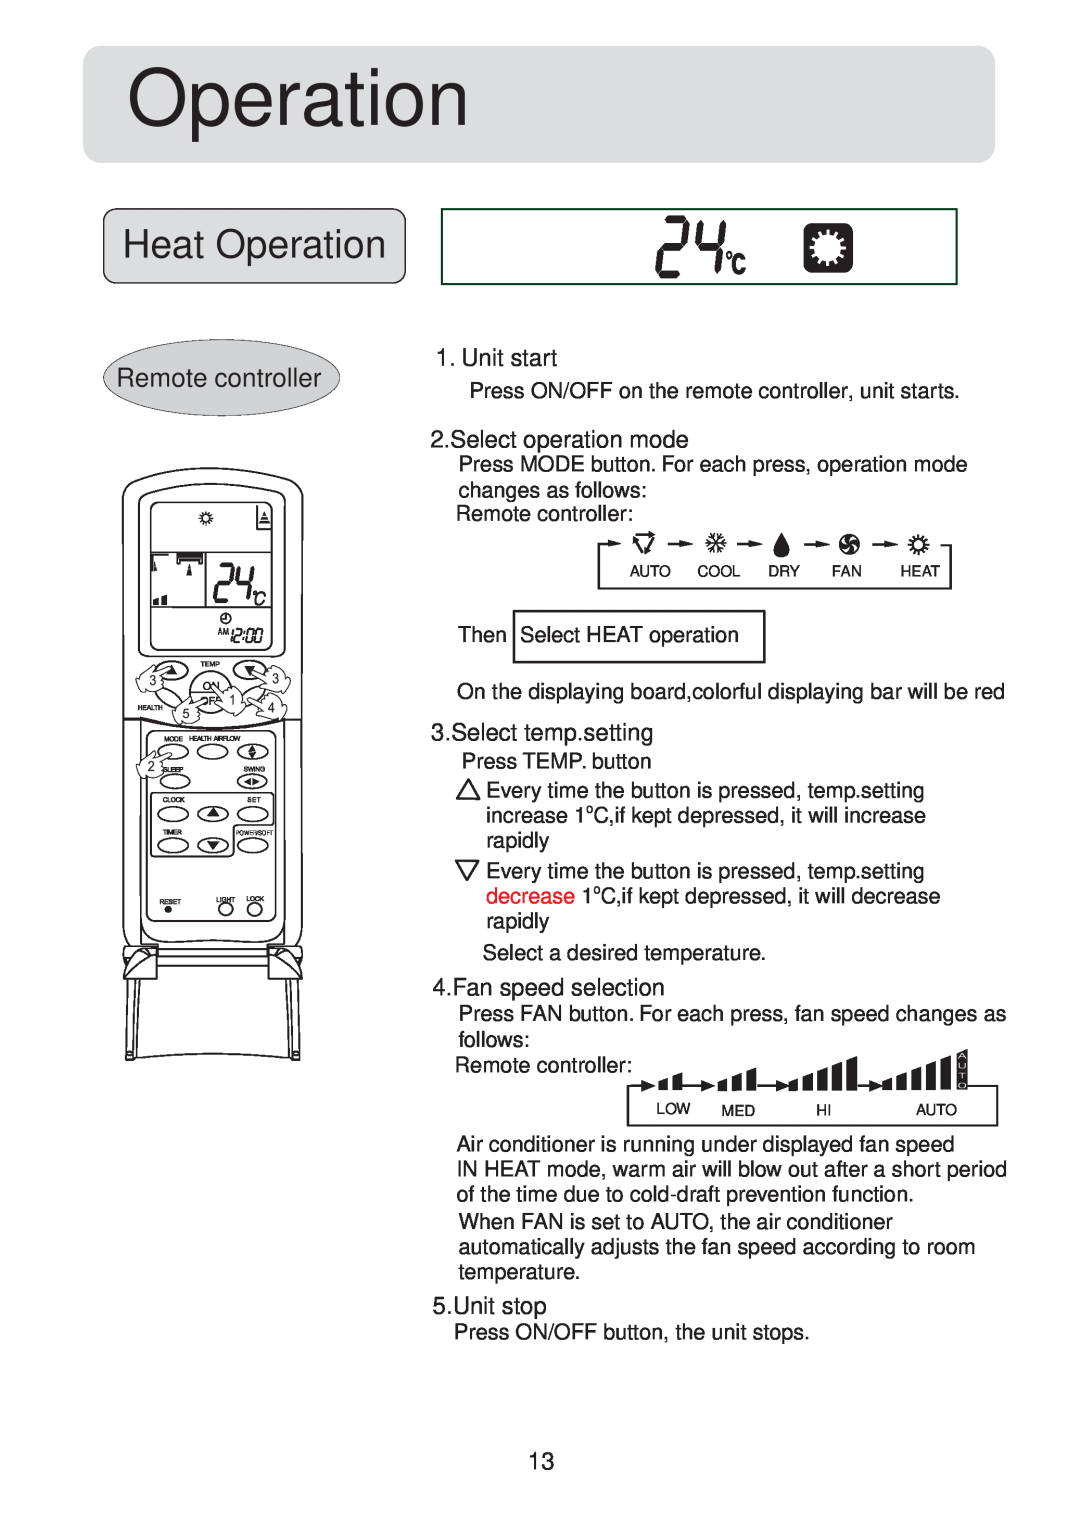 Haier HSU-09HV04, HSU-12HV04, HSU-18HV04, HSU-22HV04 Heat Operation, Remote controller, Unit start, Select operation mode 